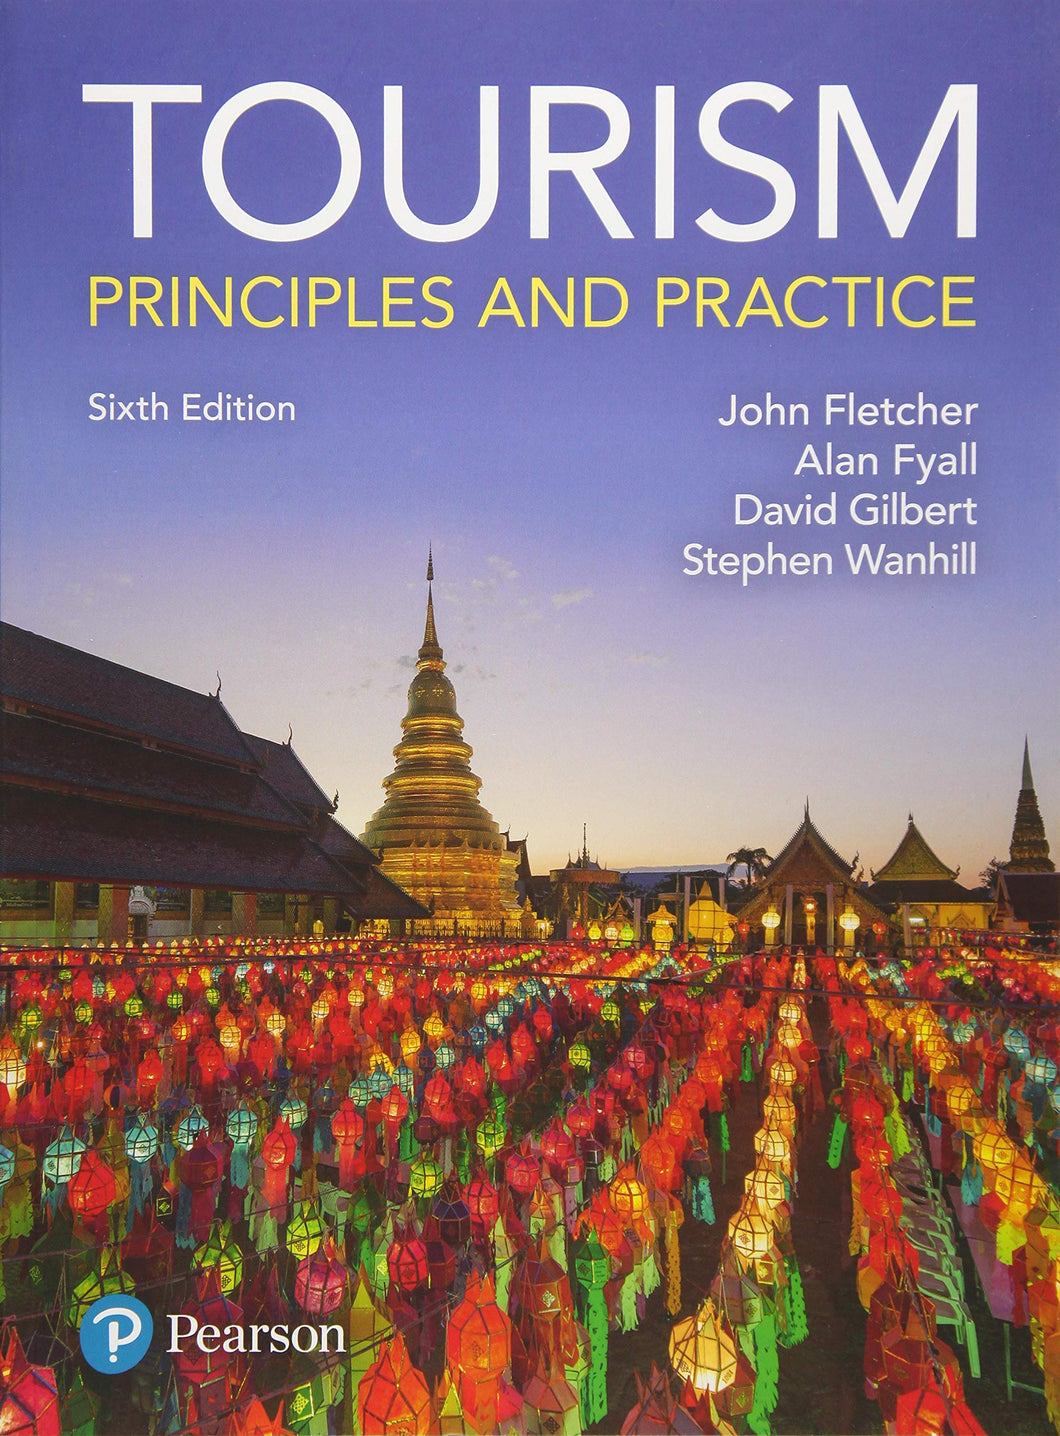 Tourism: Principles and Practice [Paperback] 6e by Alan Fyall - Smiling Bookstore